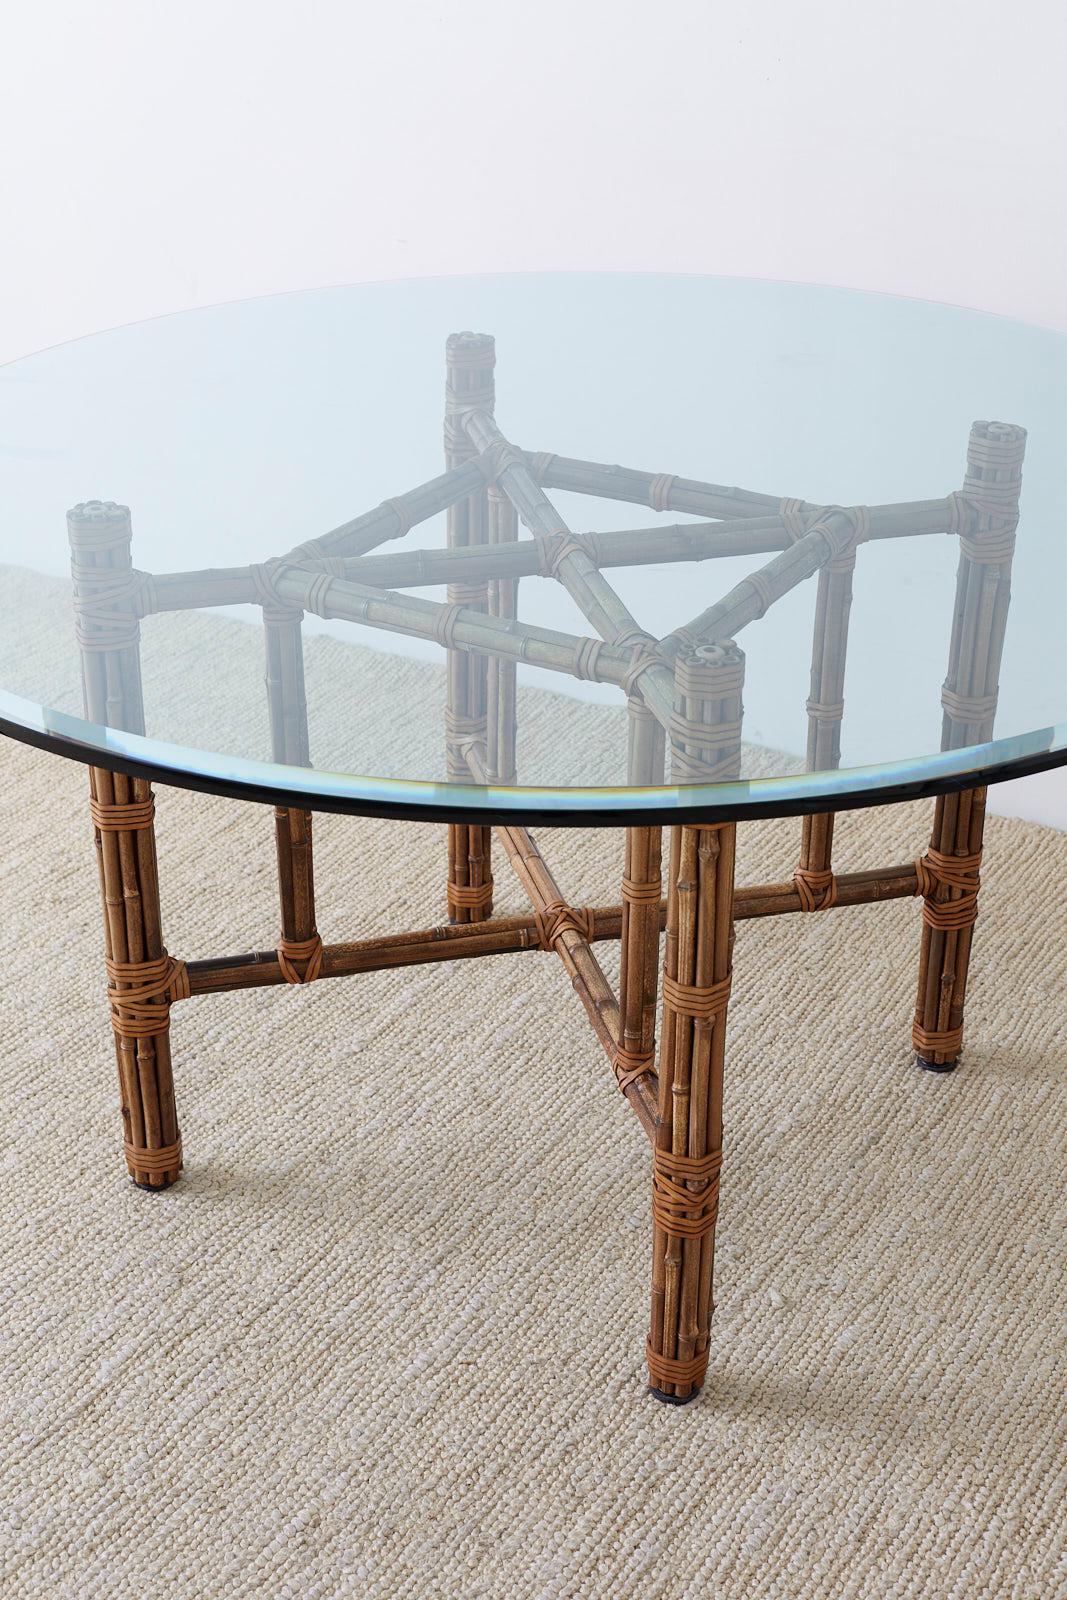 Beveled McGuire Organic Modern Bamboo Rattan Round Dining Table